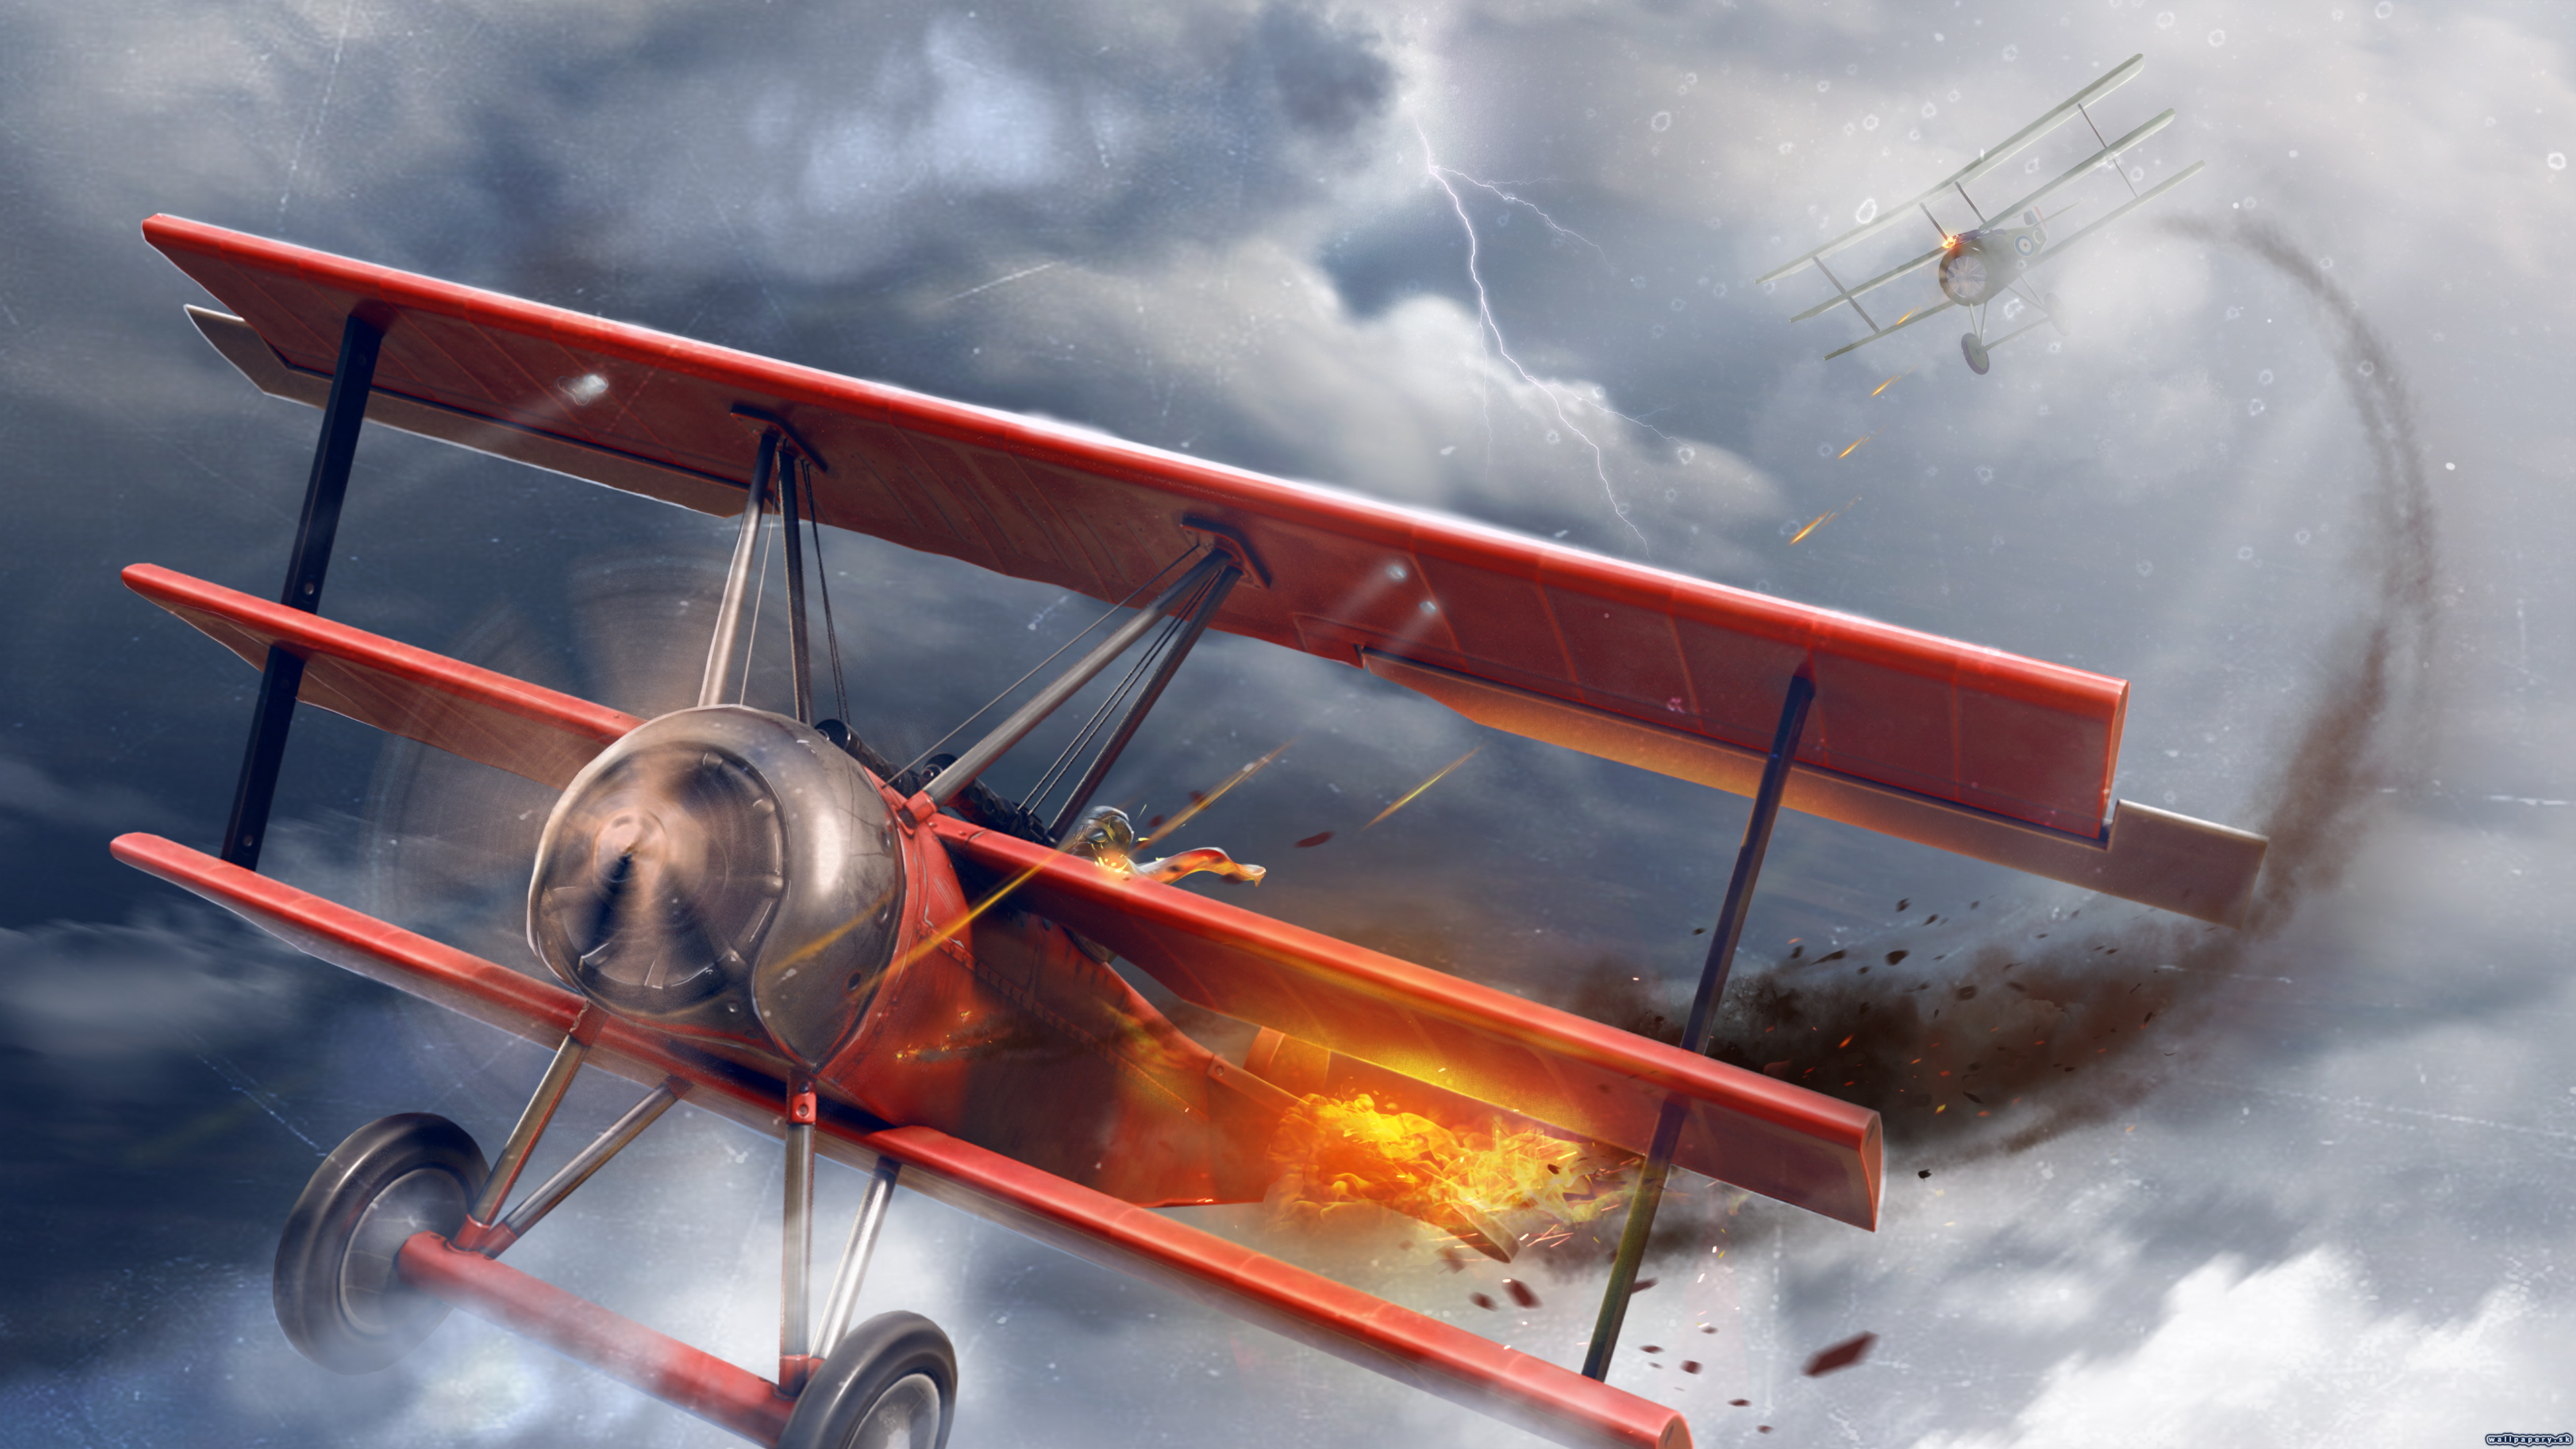 Red Wings: Aces of the Sky - wallpaper 3